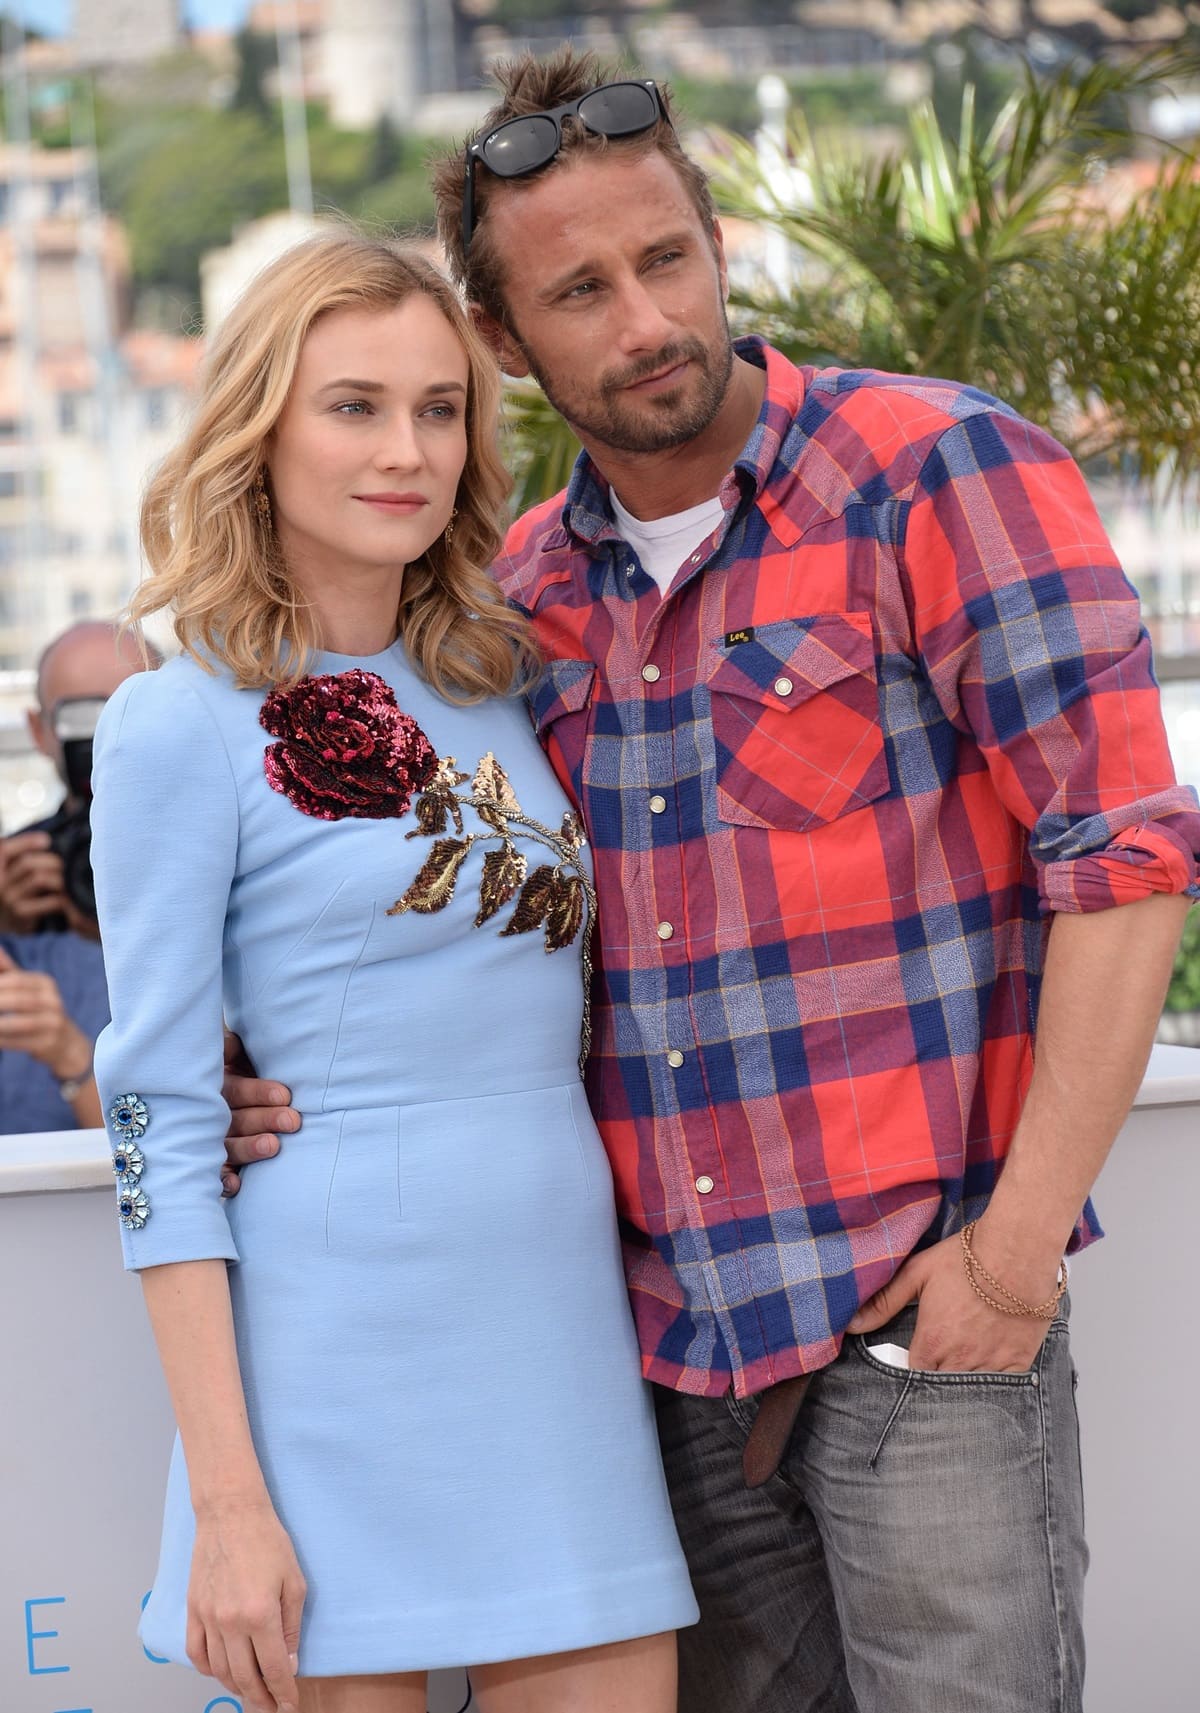 Diane Kruger and Matthias Schoenaerts attend the "Disorder" photocall during the 68th annual Cannes Film Festival